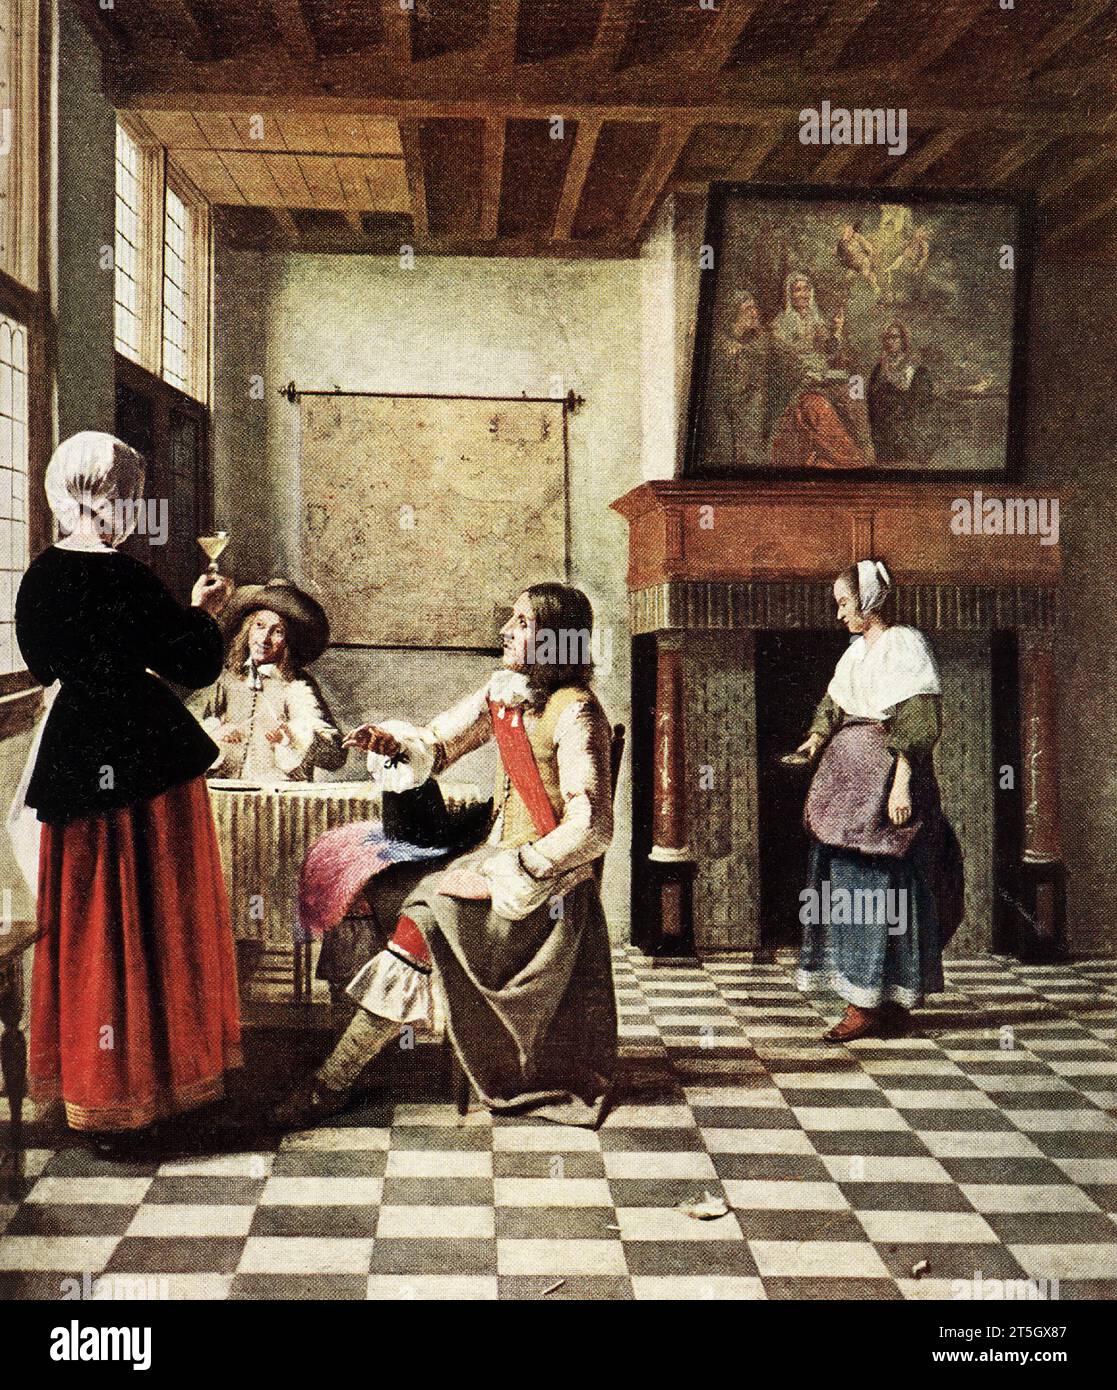 The 1916 caption reads: “Pieter de Hooch 1629-1677 Dutch School 'Dutch interior—with Two Cavaliers and the Girl in the Red Skirt'. in National Gallery. Signed P. D. H. on the table in the left foreground by the window. Painted in oil on canvas. 2 ft 5 in h  x 2 ft 1 in w.” Pieter de Hooch was a Dutch Golden Age painter famous for his genre works of quiet domestic scenes with an open doorway. He was a contemporary, in the Delft Guild of St. Luke, of Jan Vermeer with whom his work shares themes and style. Stock Photo